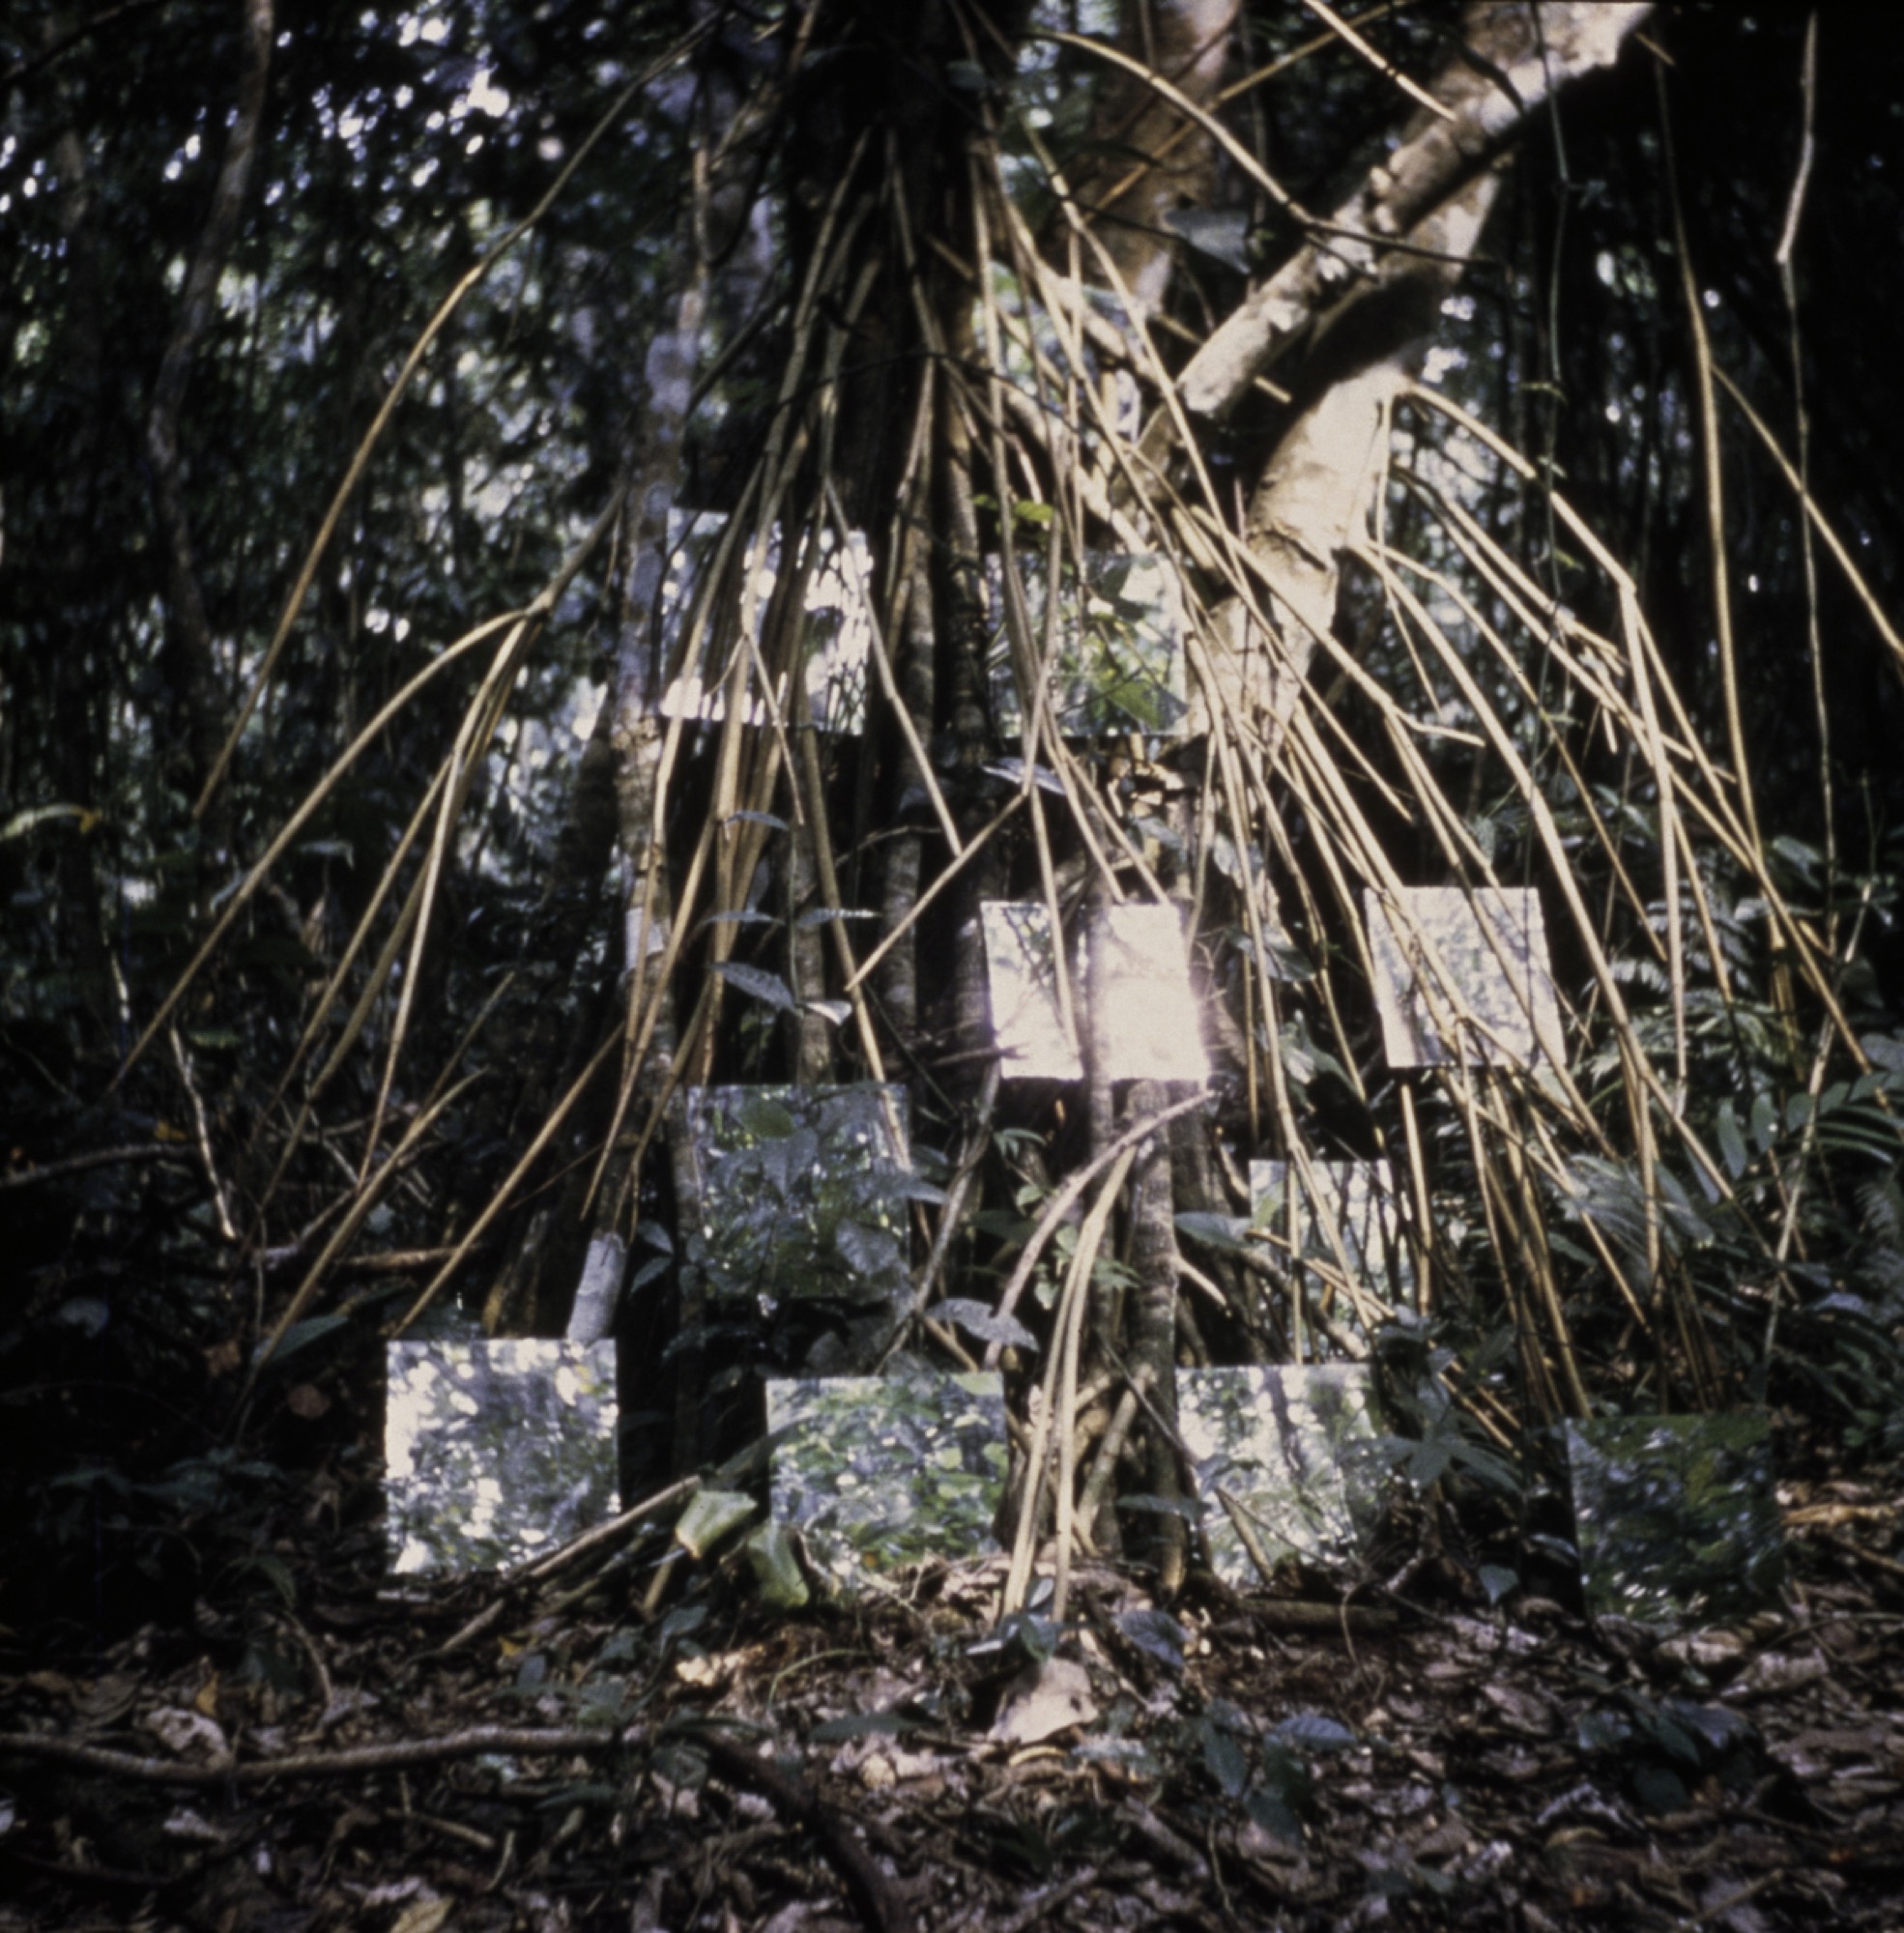 Robert Smithson, <em>Yucatan Mirror Displacements</em> (1—9) 1969 (detail), nine chromogenic prints from original 126 format slides, each image 61 x 61 cm. The Solomon R. Guggenheim Museum, New York Purchased with funds contributed by the Photography Committee and with funds contributed by theInternational Director’s Council and Executive Committee Members: Edythe Broad, Henry Buhl, Elaine Terner Cooper, Linda Fischbach, Ronnie Heyman, Dakis Joannou, Cindy Johnson, Barbara Lane, Linda Macklowe, Brian McIver, Peter Norton Foundation, Willem Peppler, Denise Rich, Rachel Rudin, David Teiger, Ginny Williams and Elliot K. Wolk, 1999. Photo: The Solomon R. Guggenheim Foundation / Art Resource, NY. © Holt-Smithson Foundation/VAGA. Licensed by Viscopy, 2017.